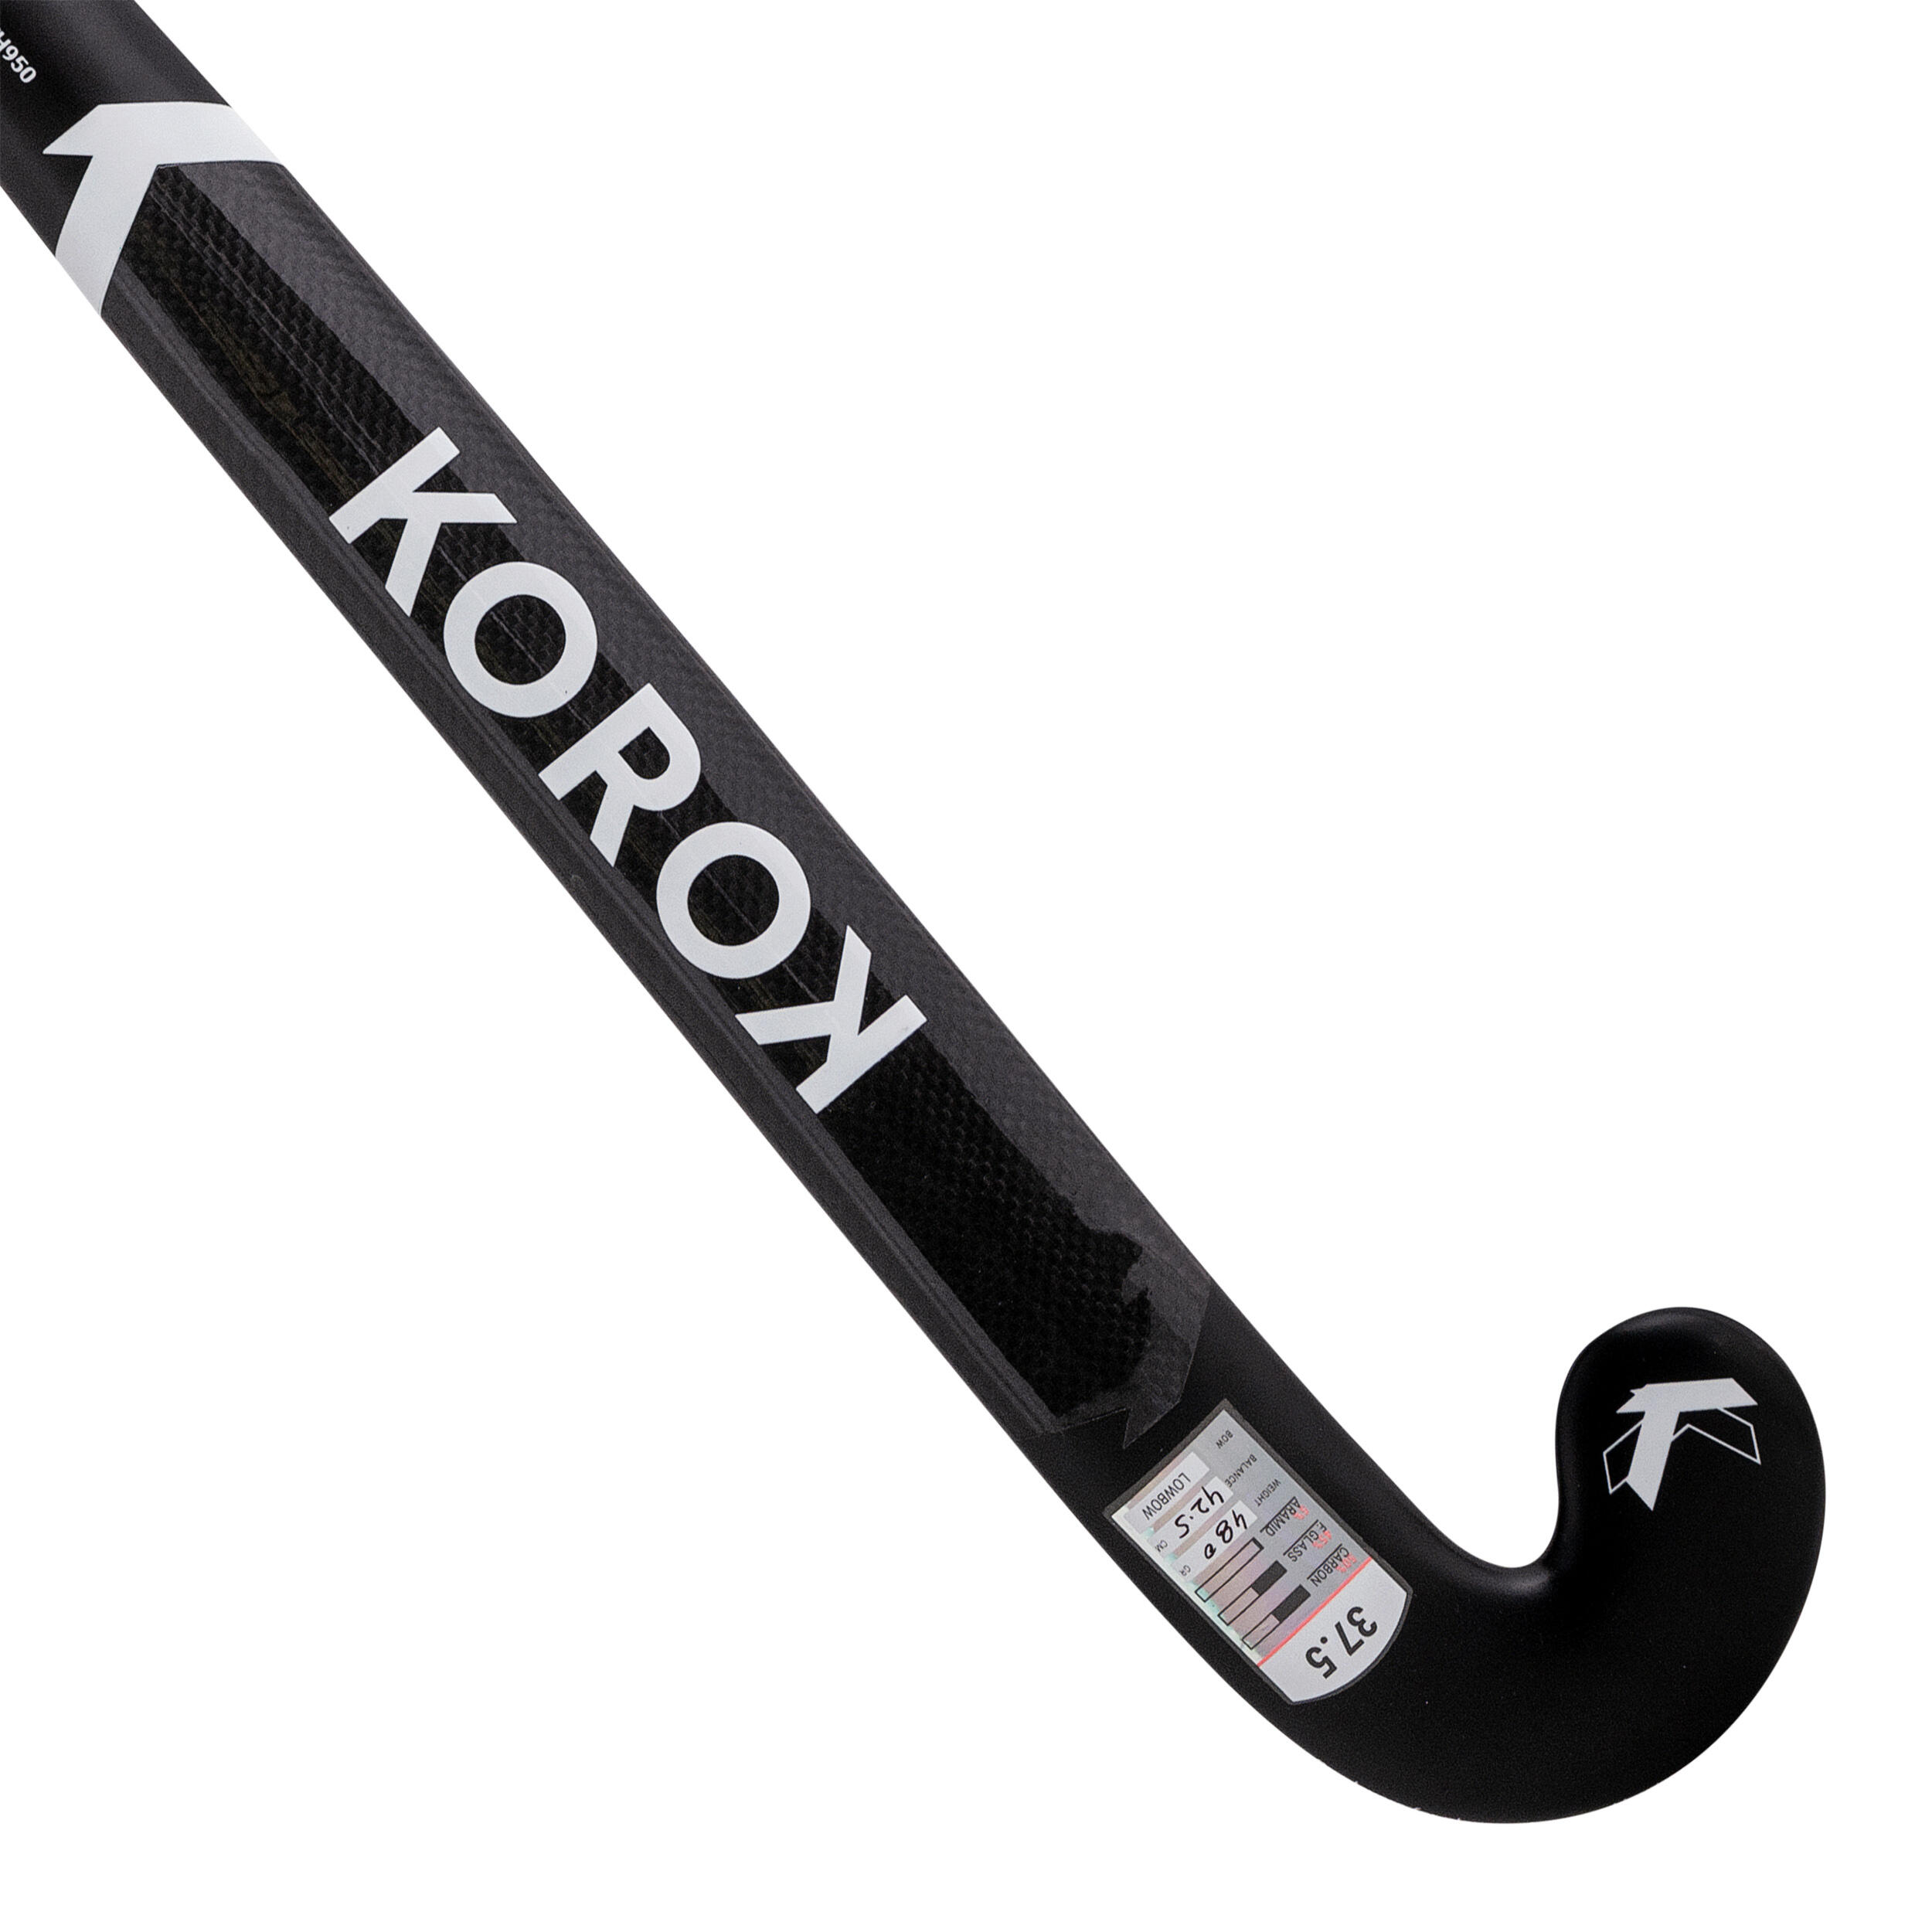 Adult Advanced 50% Carbon Low Bow Indoor Hockey Stick FH950 - Black/White 2/10